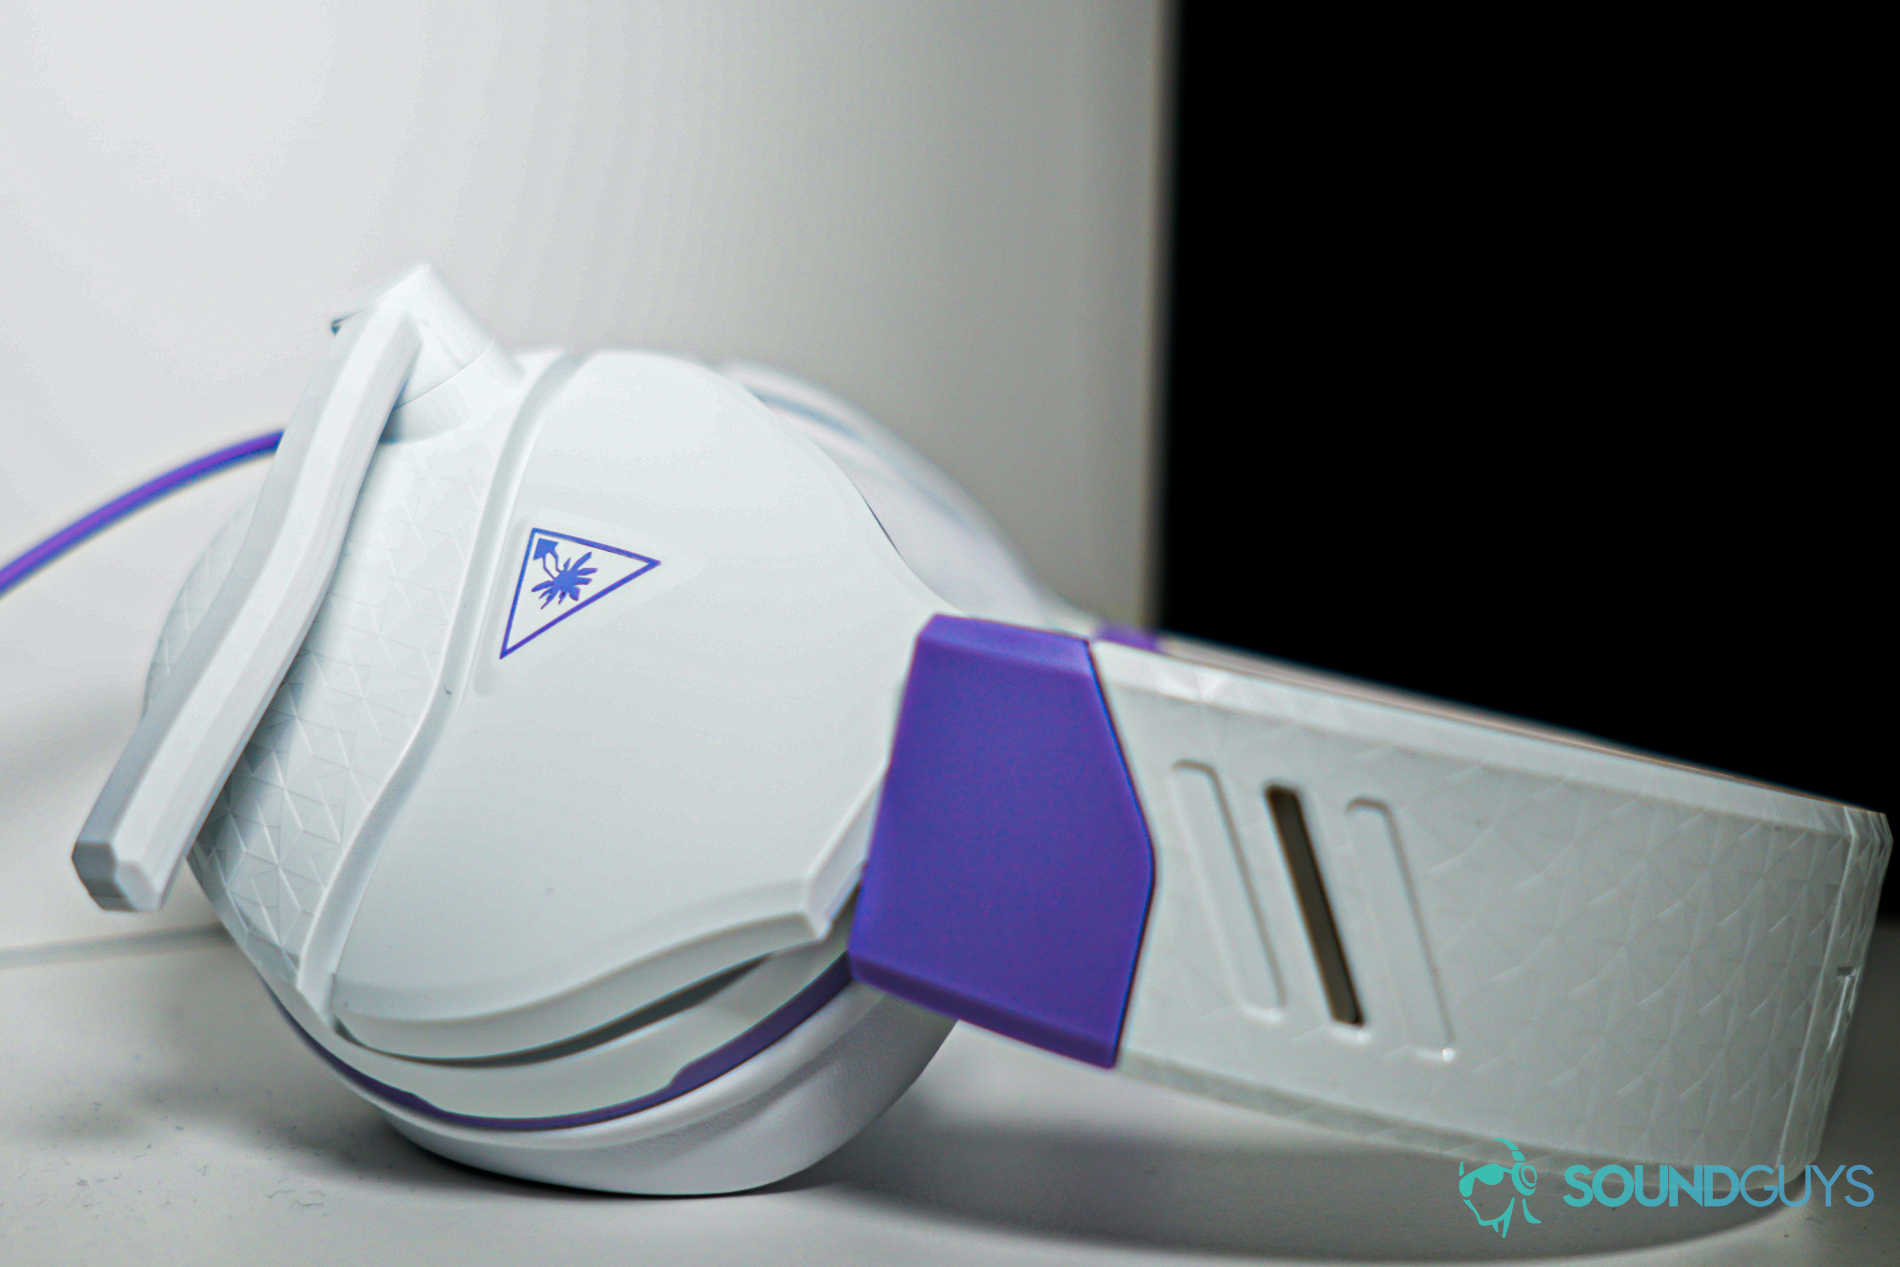 The Turtle Beach Recon Spark gaming headset sits on a white shelf, laying on its side.